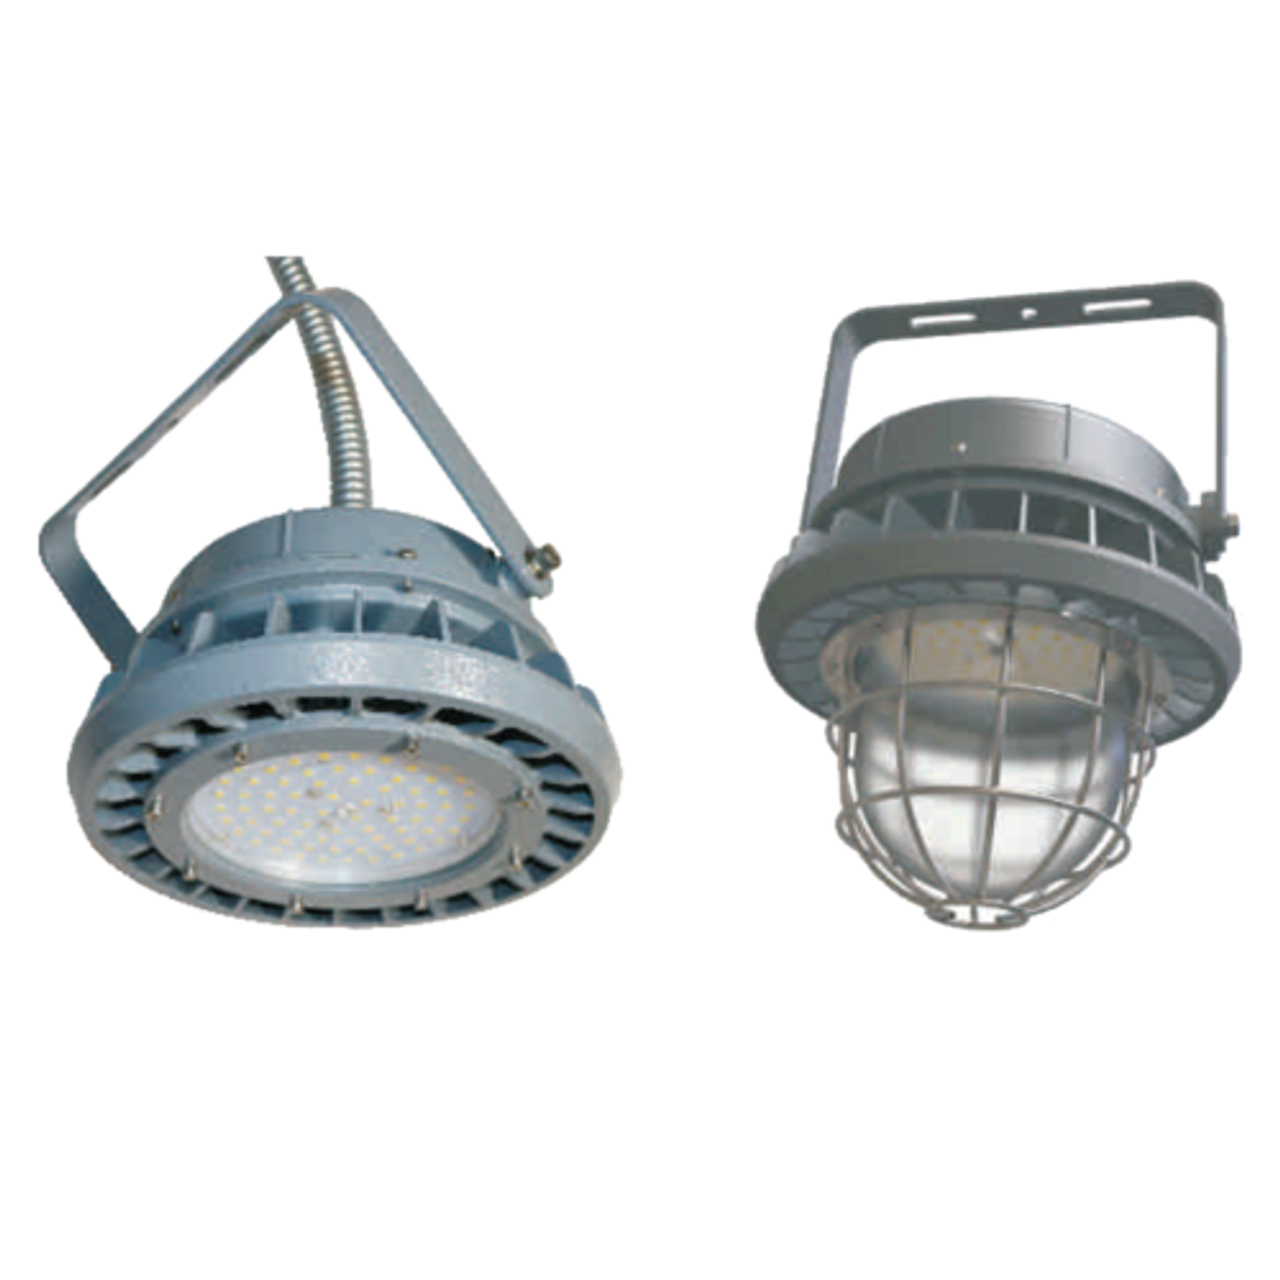 Demystifying Explosion Proof Lights: Understanding Their Purpose and Functionality